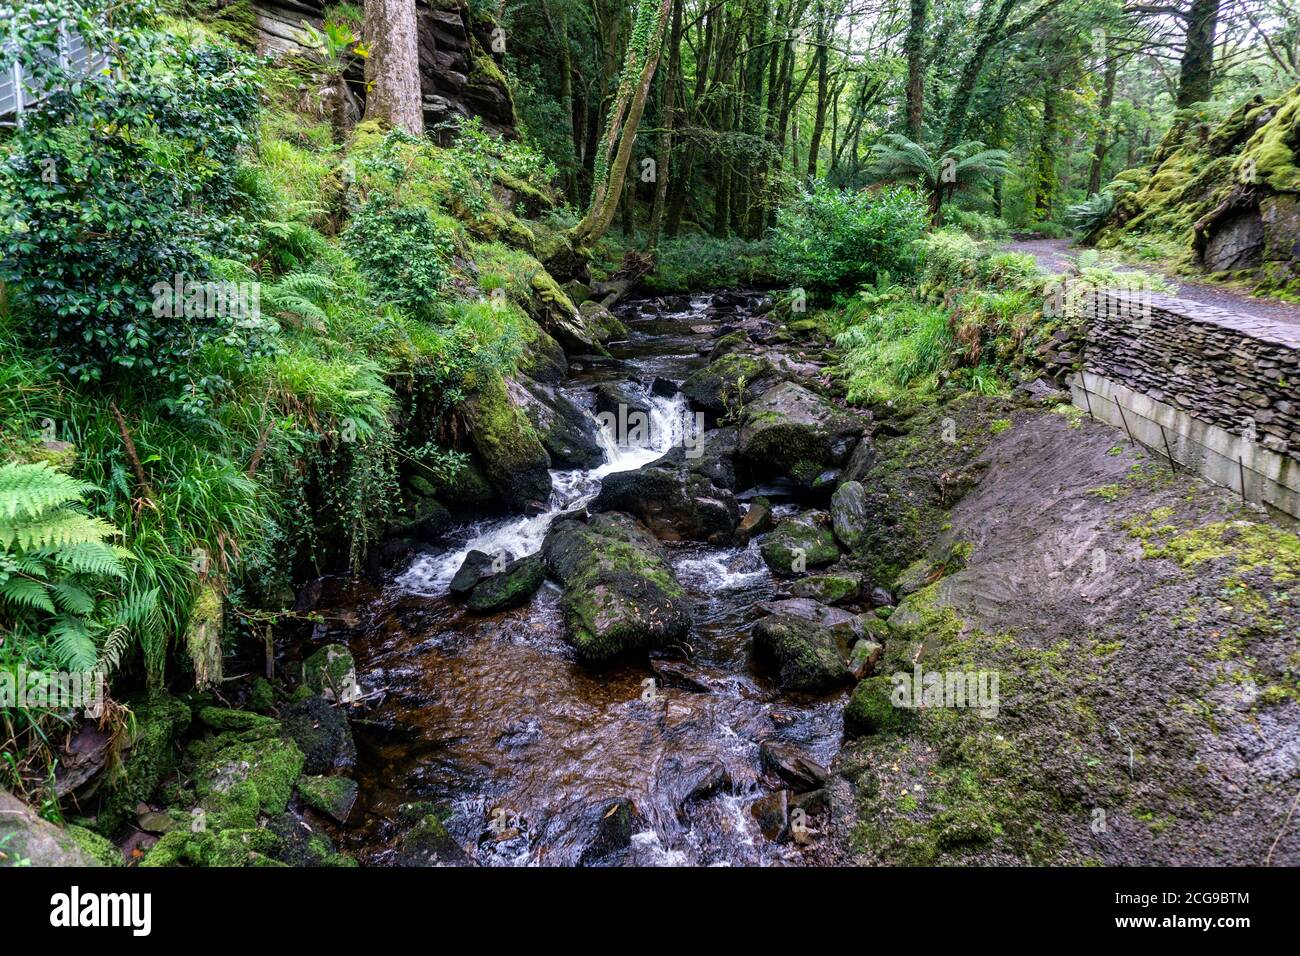 The  Deligeenagh River rushing through the sub-tropical gardens of  Kells Bay Gardens in Kells, County Kerry, Ireland. Stock Photo